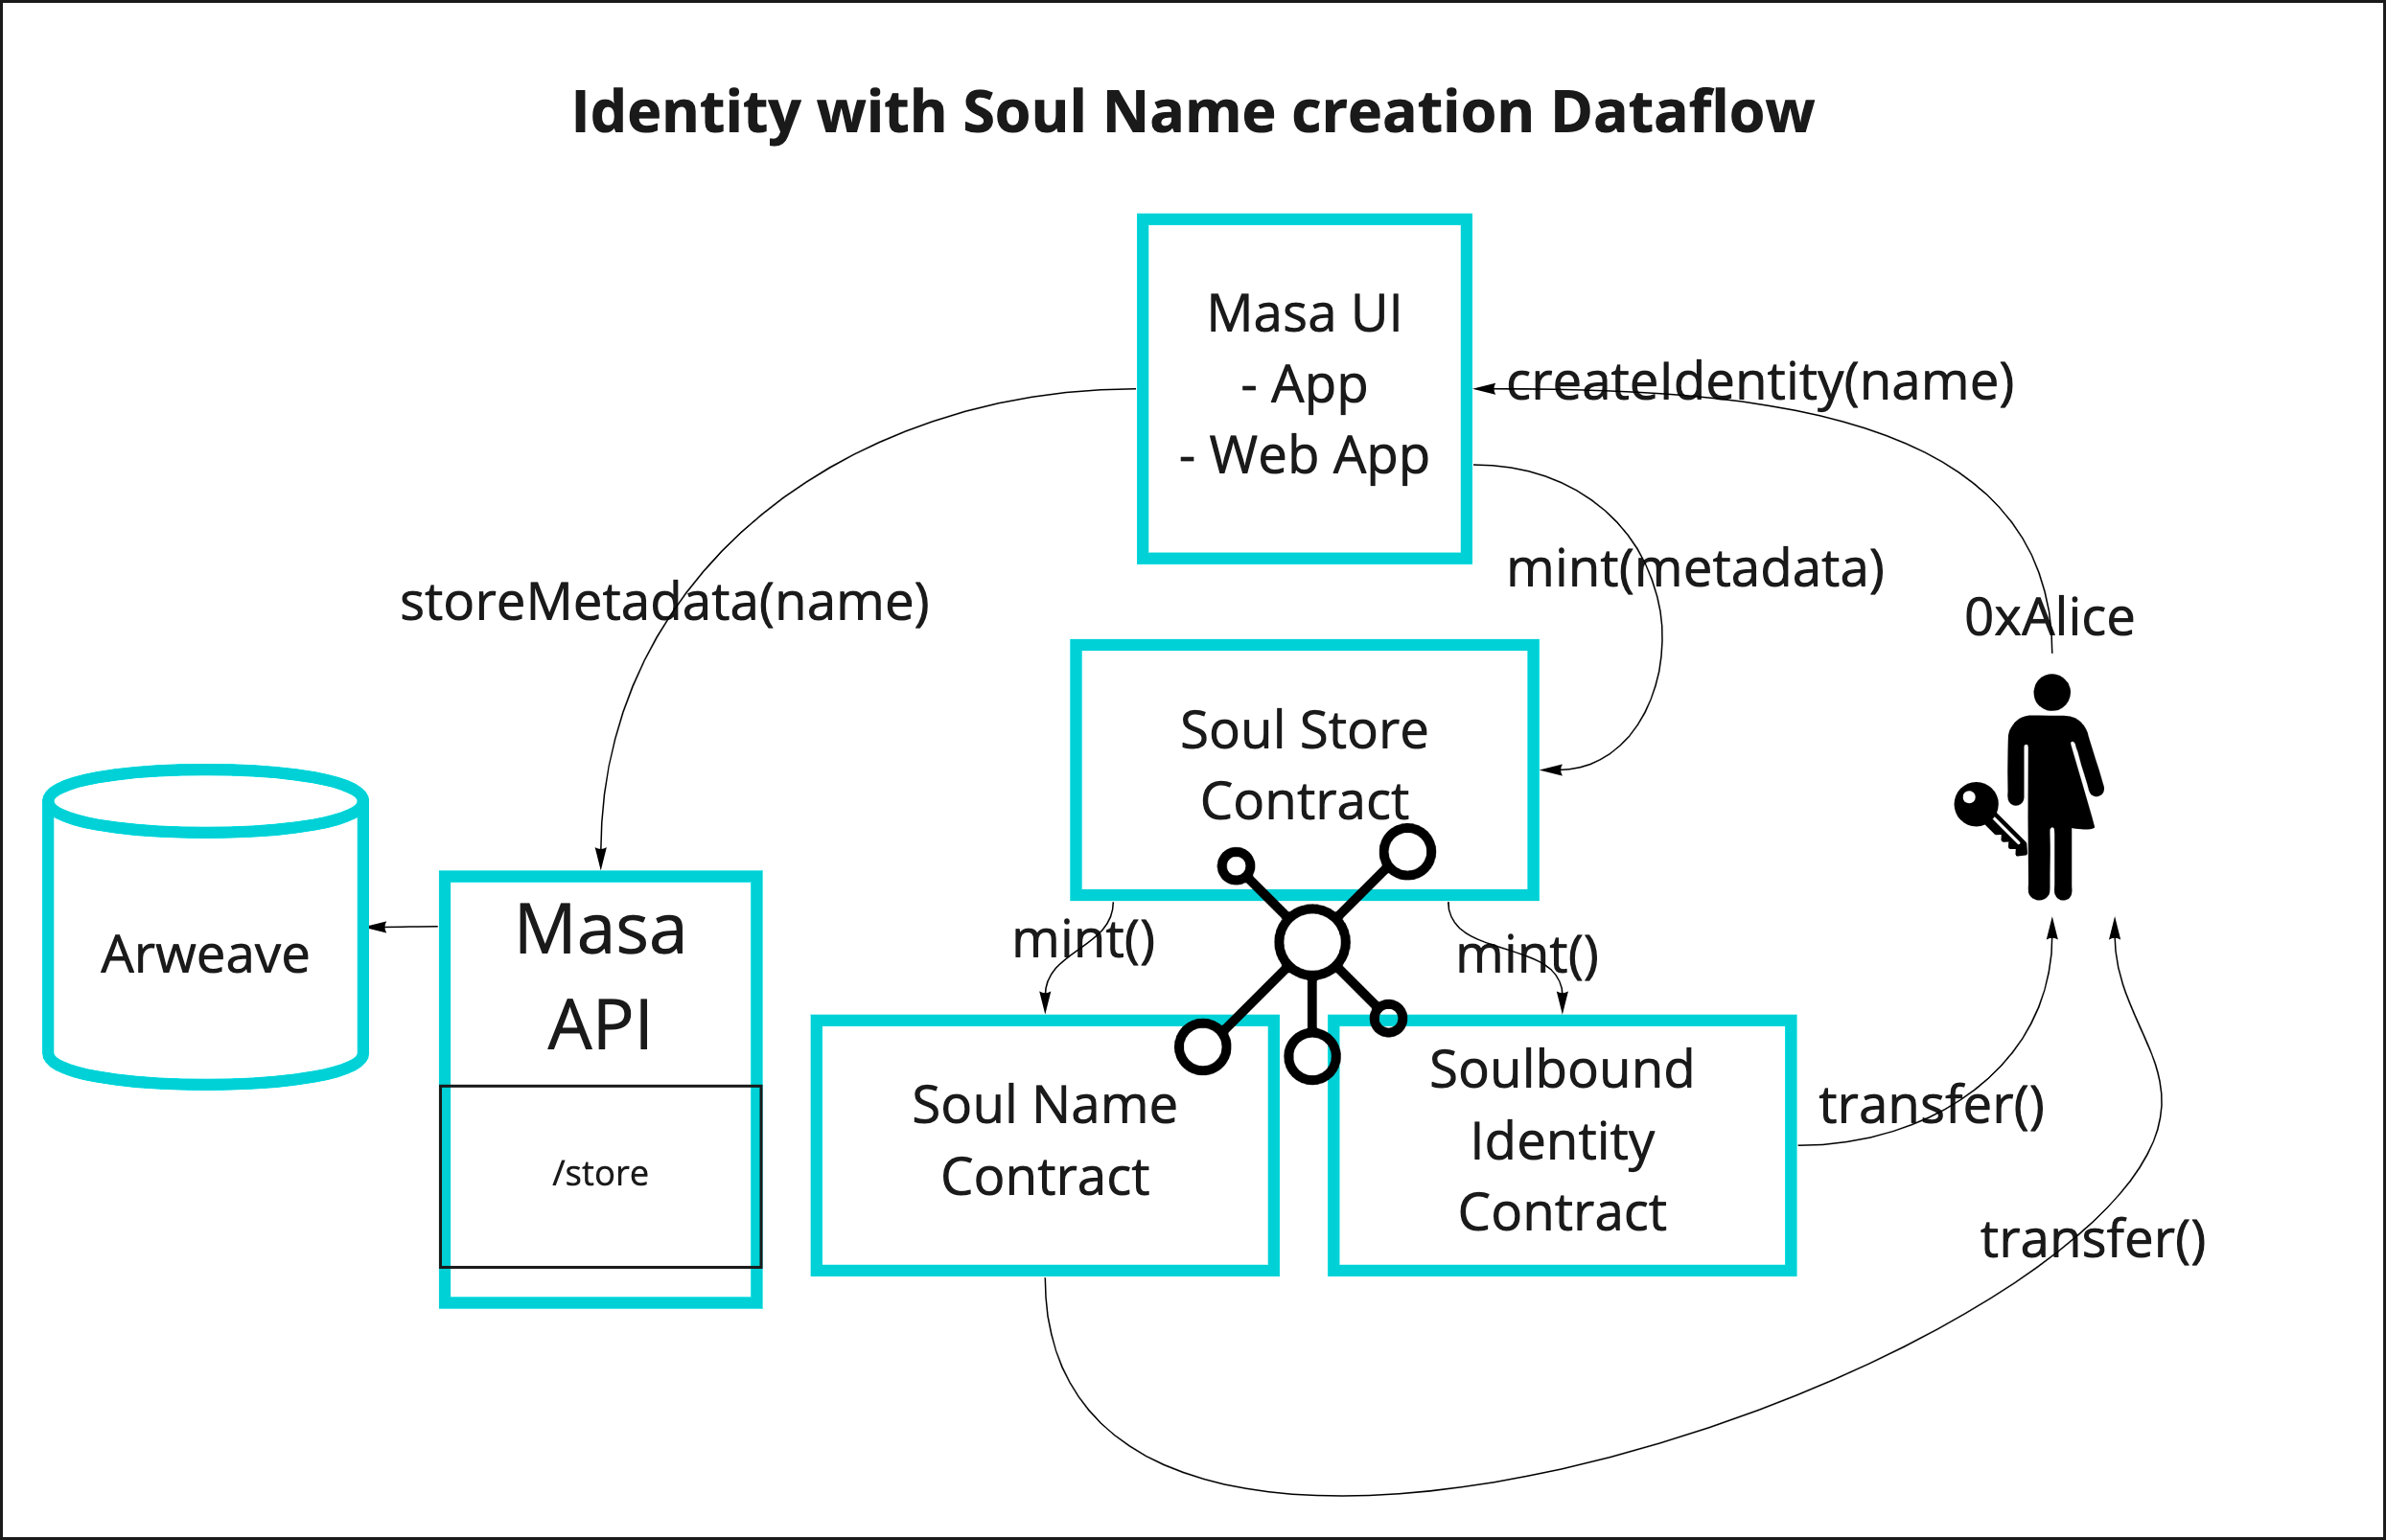 Soulbound Identity Creation Process